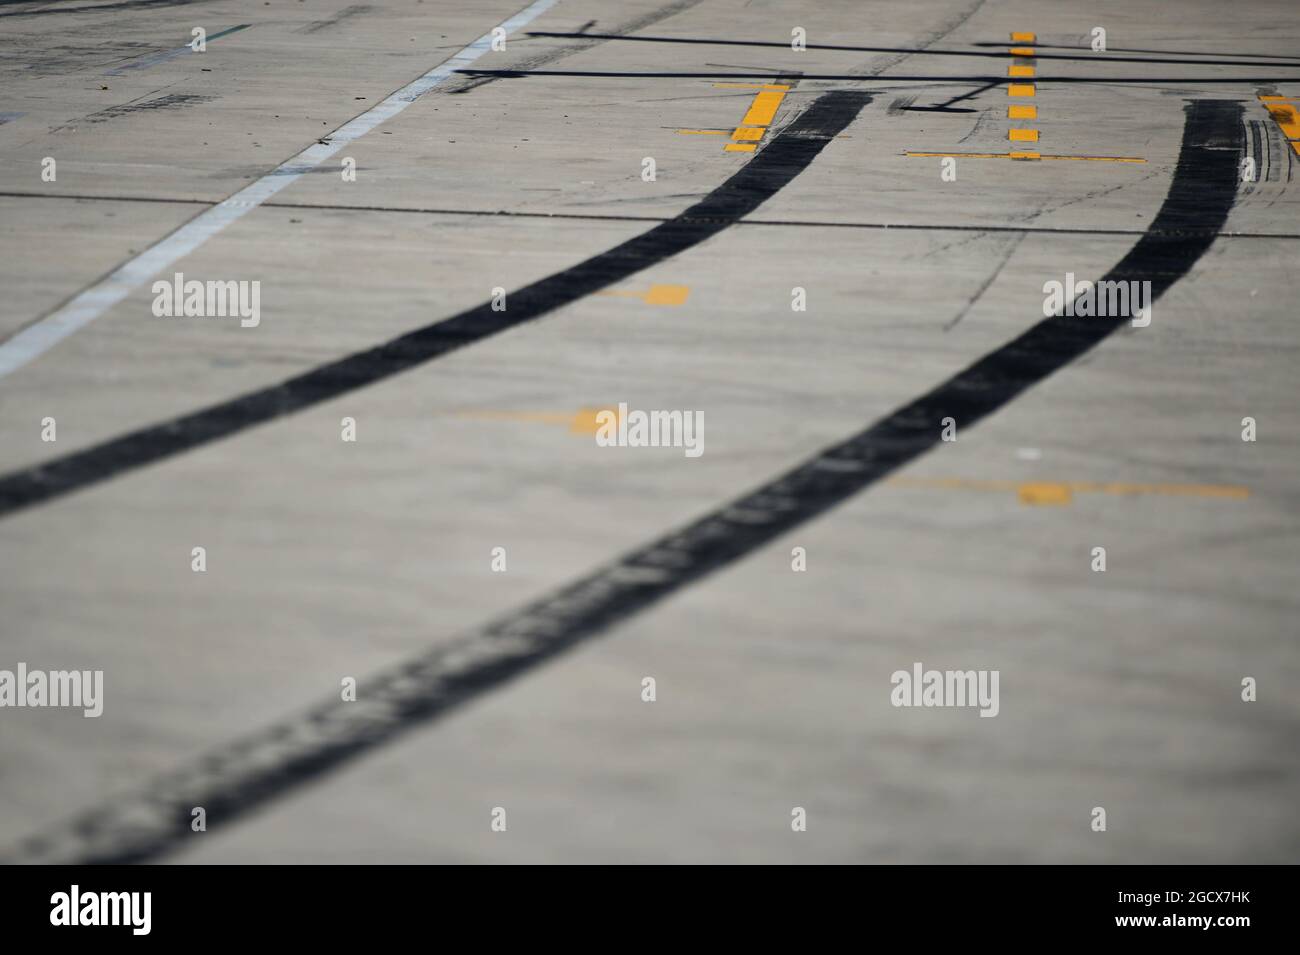 Pit lane rubber laid down. United States Grand Prix, Saturday 22nd October 2016. Circuit of the Americas, Austin, Texas, USA. Stock Photo